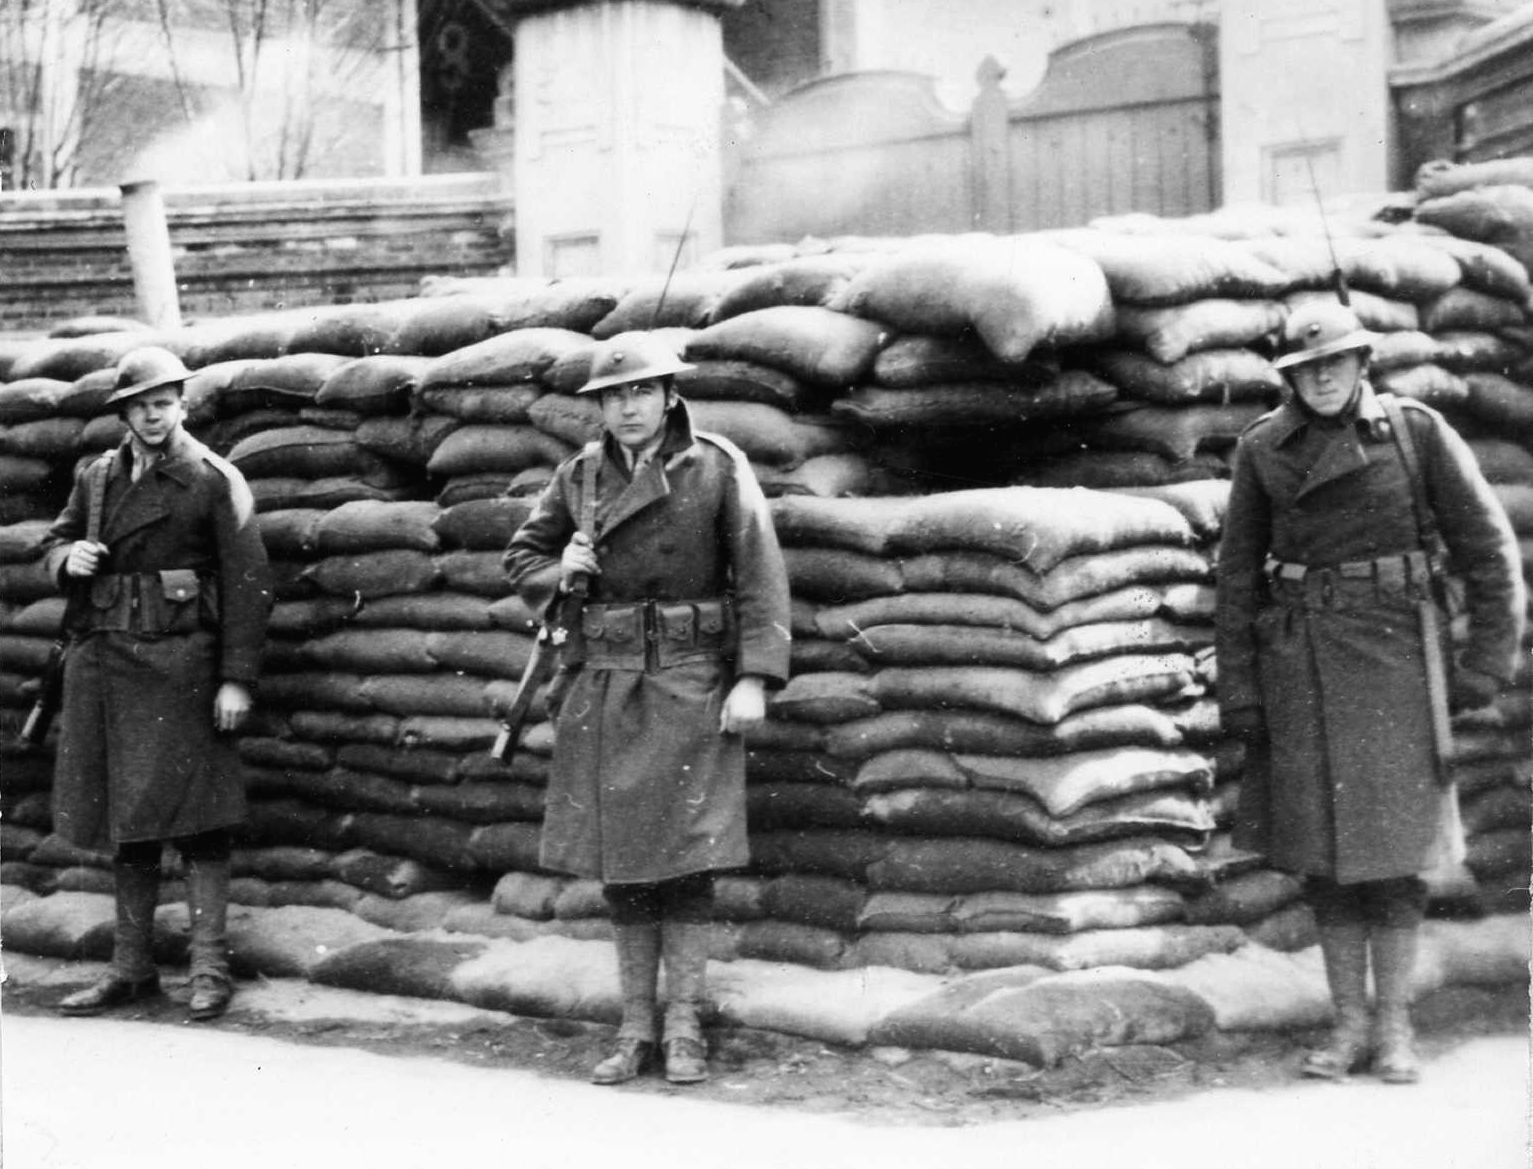 In 1932, a detachment of well-armed Marines from the cruiser USS Houston stands watch in front of a sandbagged blockhouse at the Ichang Ros Bridge in Shanghai.